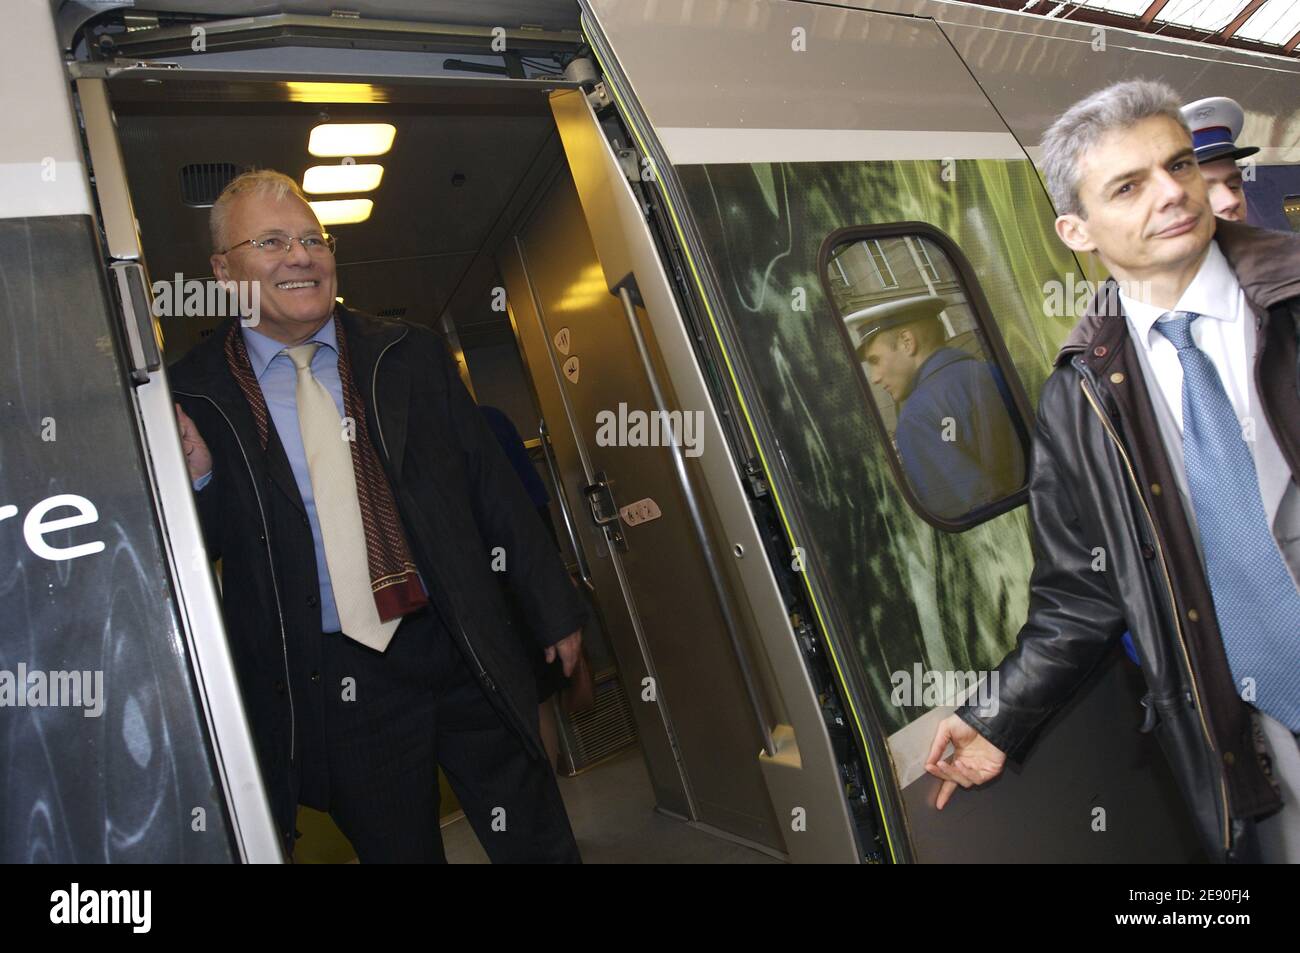 Peter Balazs arrives at the opening of TGV Highspeed Train in Strasbourg,  France on December 7, 2007, from Paris to Hauptbahnhof Main Station, Munich.  The TGV highspeed train connection Paris - Strasbourg -